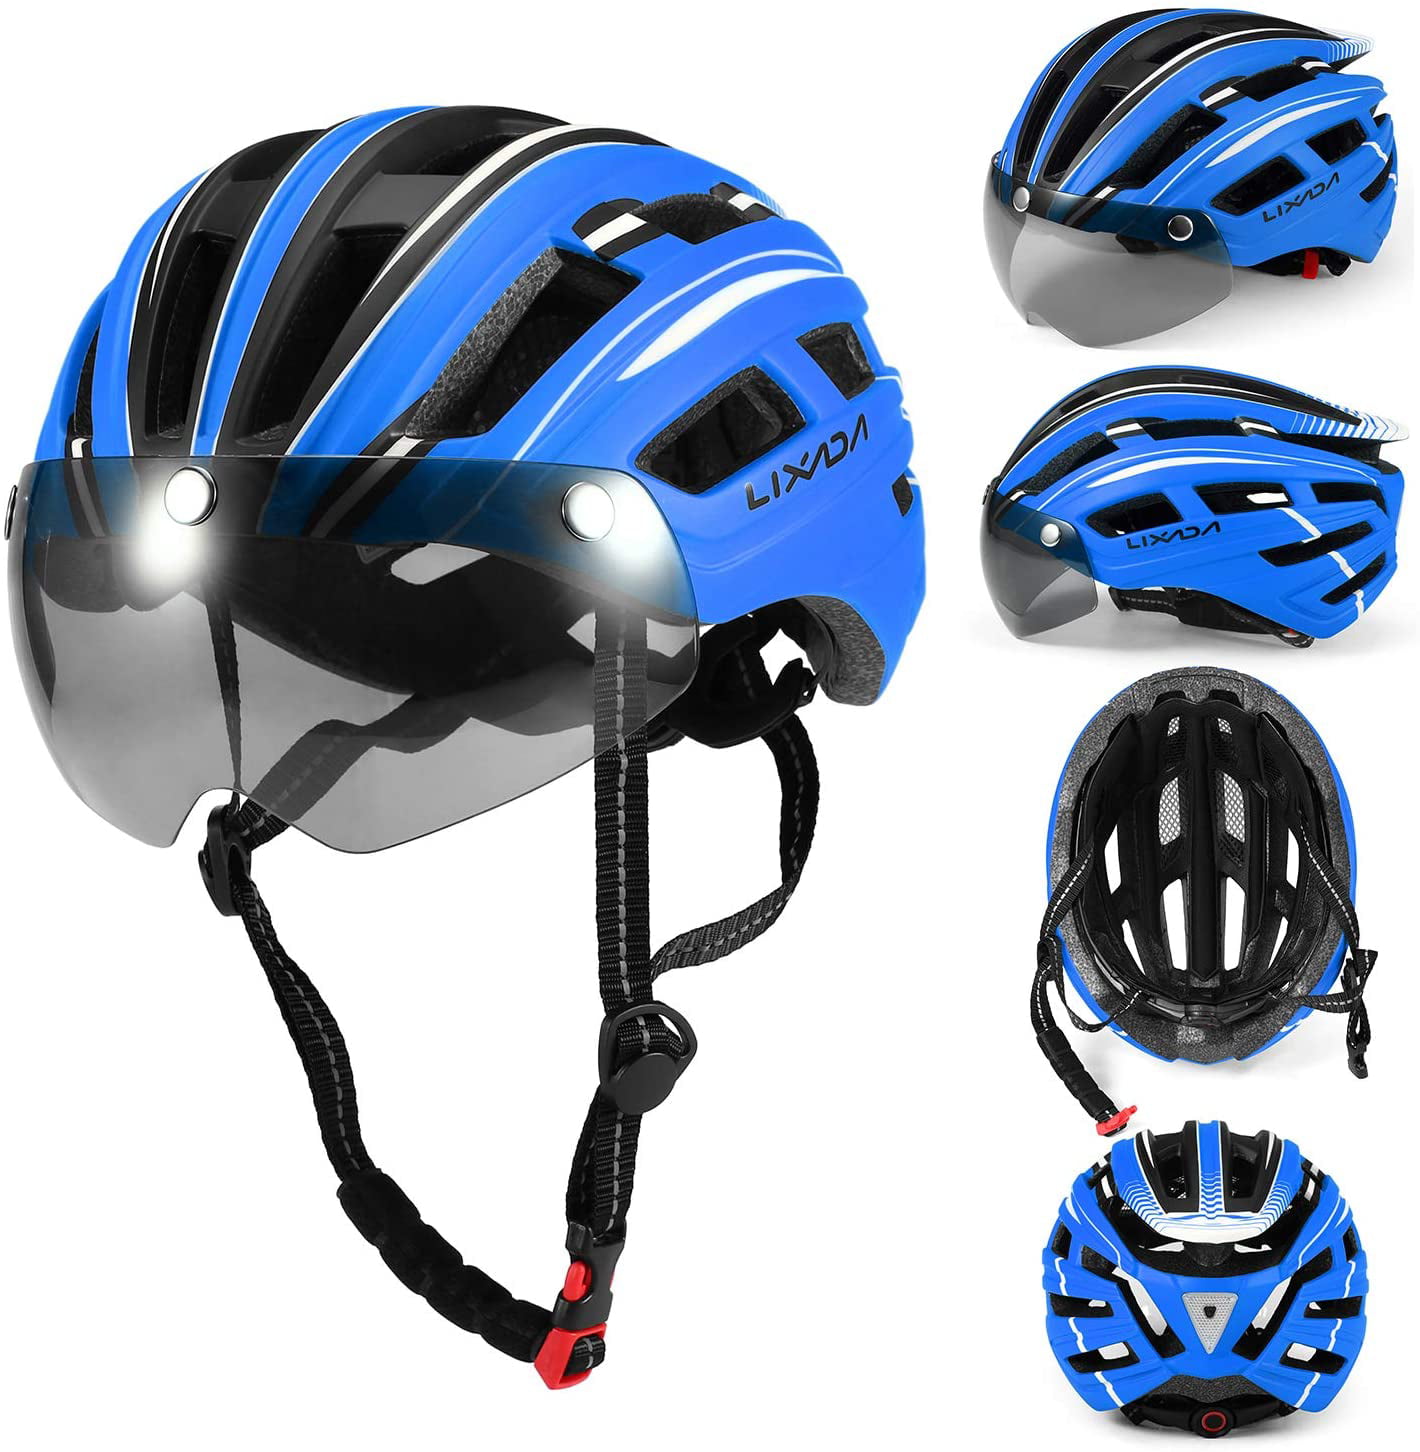 New Adult Cycling Helmet MTB Road Bicycle Bike Head Protect Helmet With Goggles 